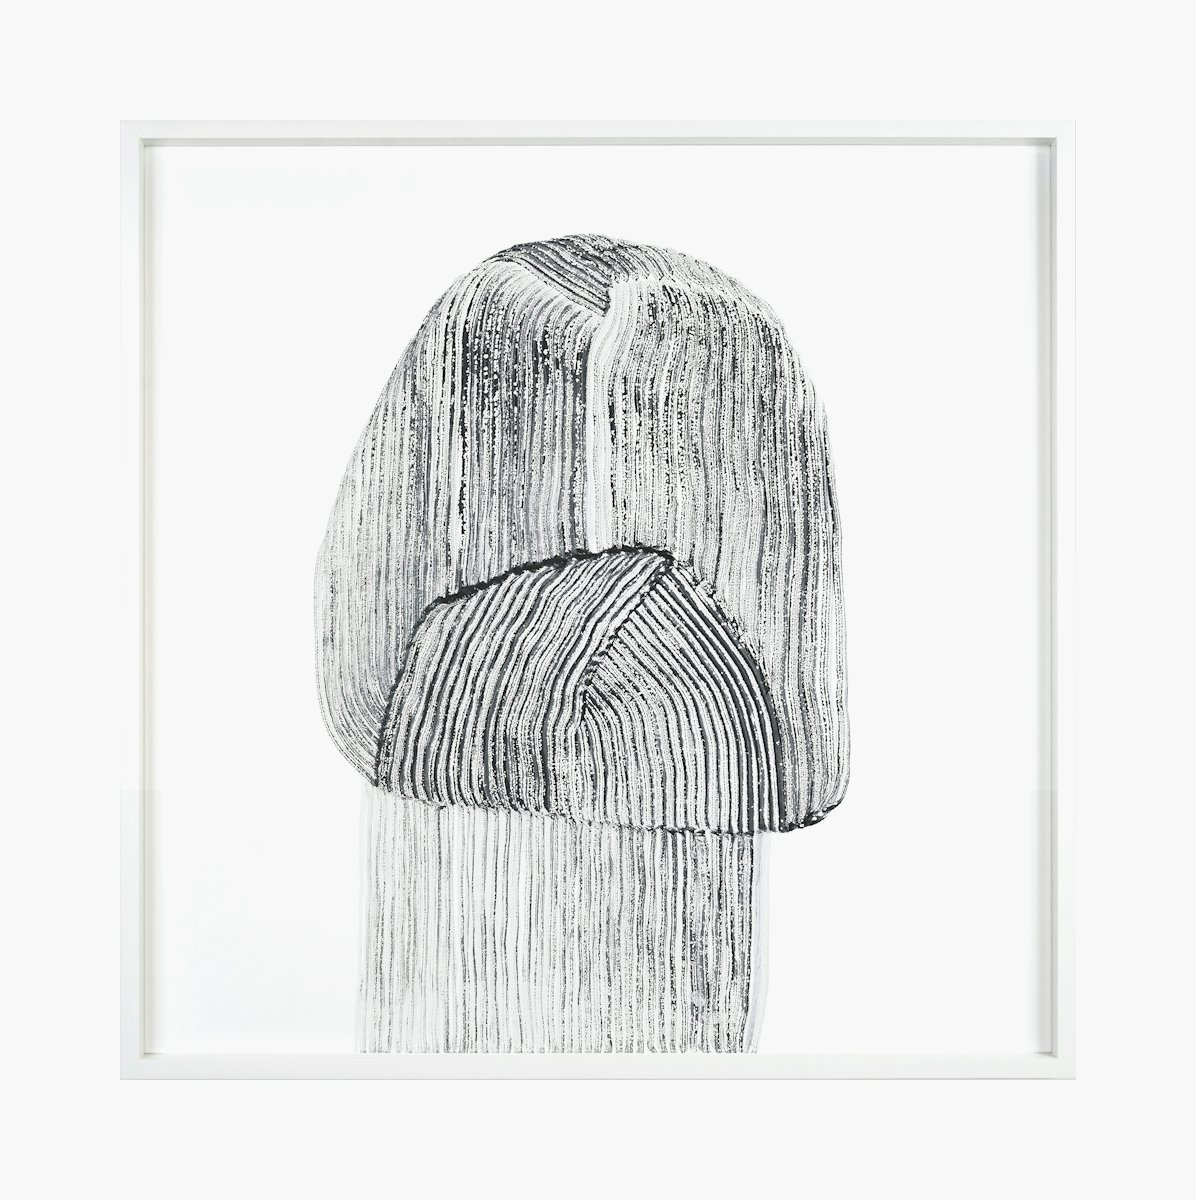 Drawing 9, Bouroullec